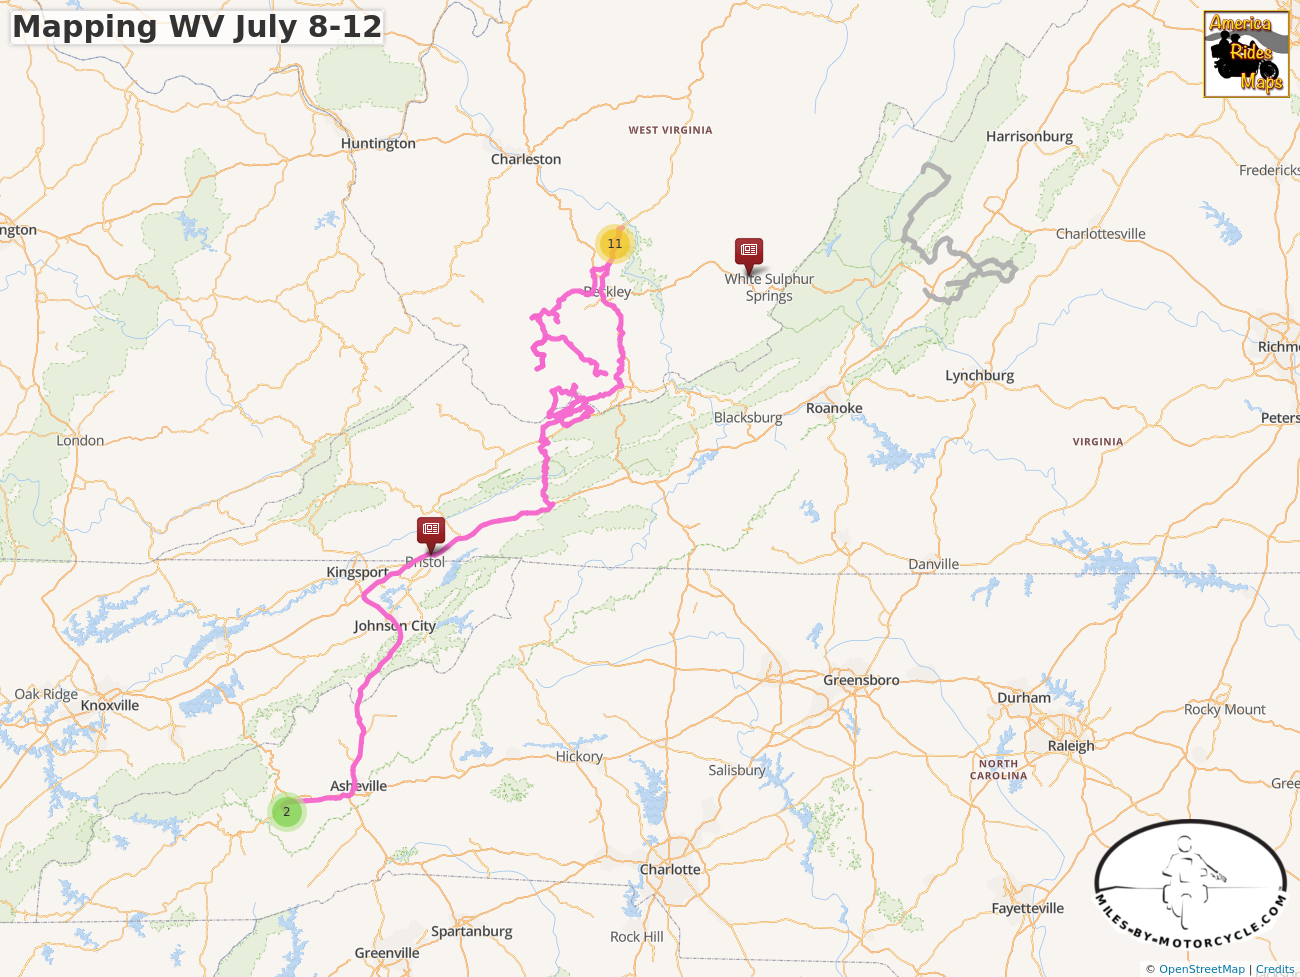 Mapping WV July 8-12